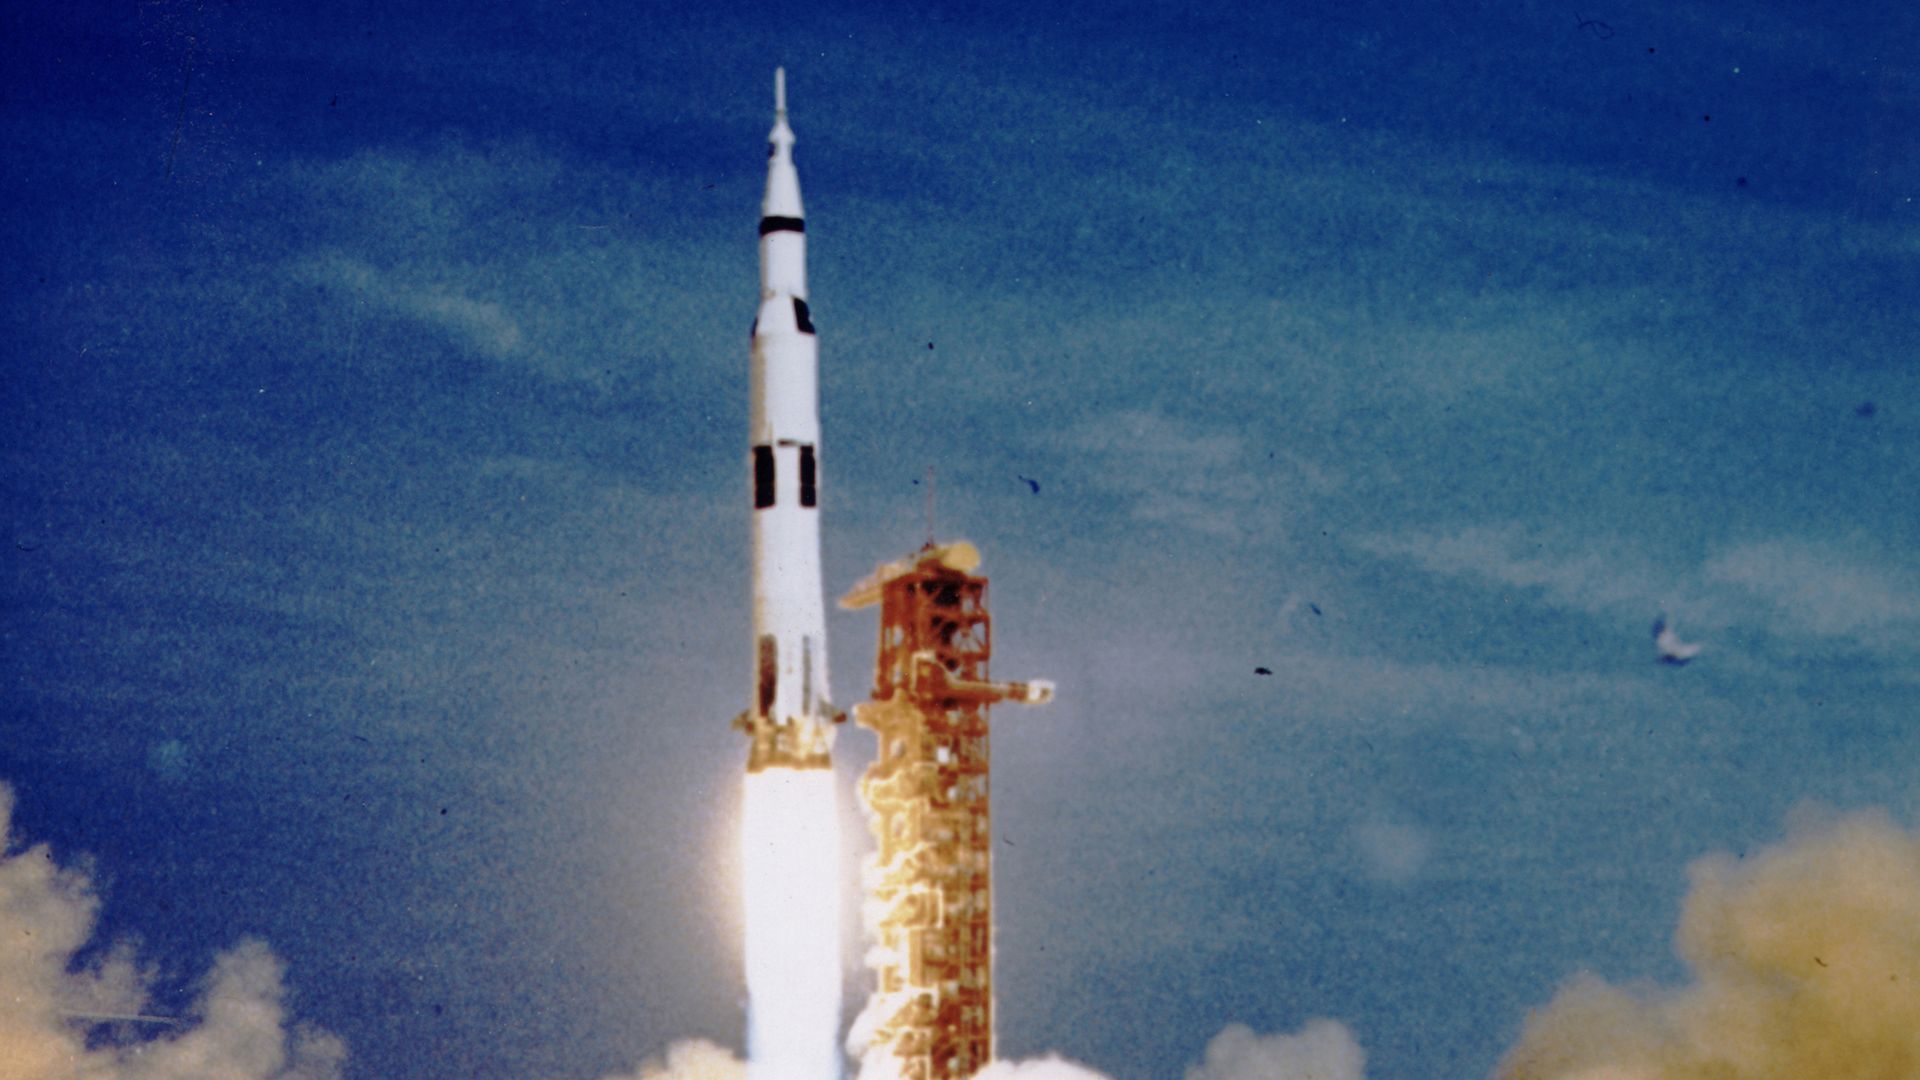 The Apollo 11 mission launching to the moon.